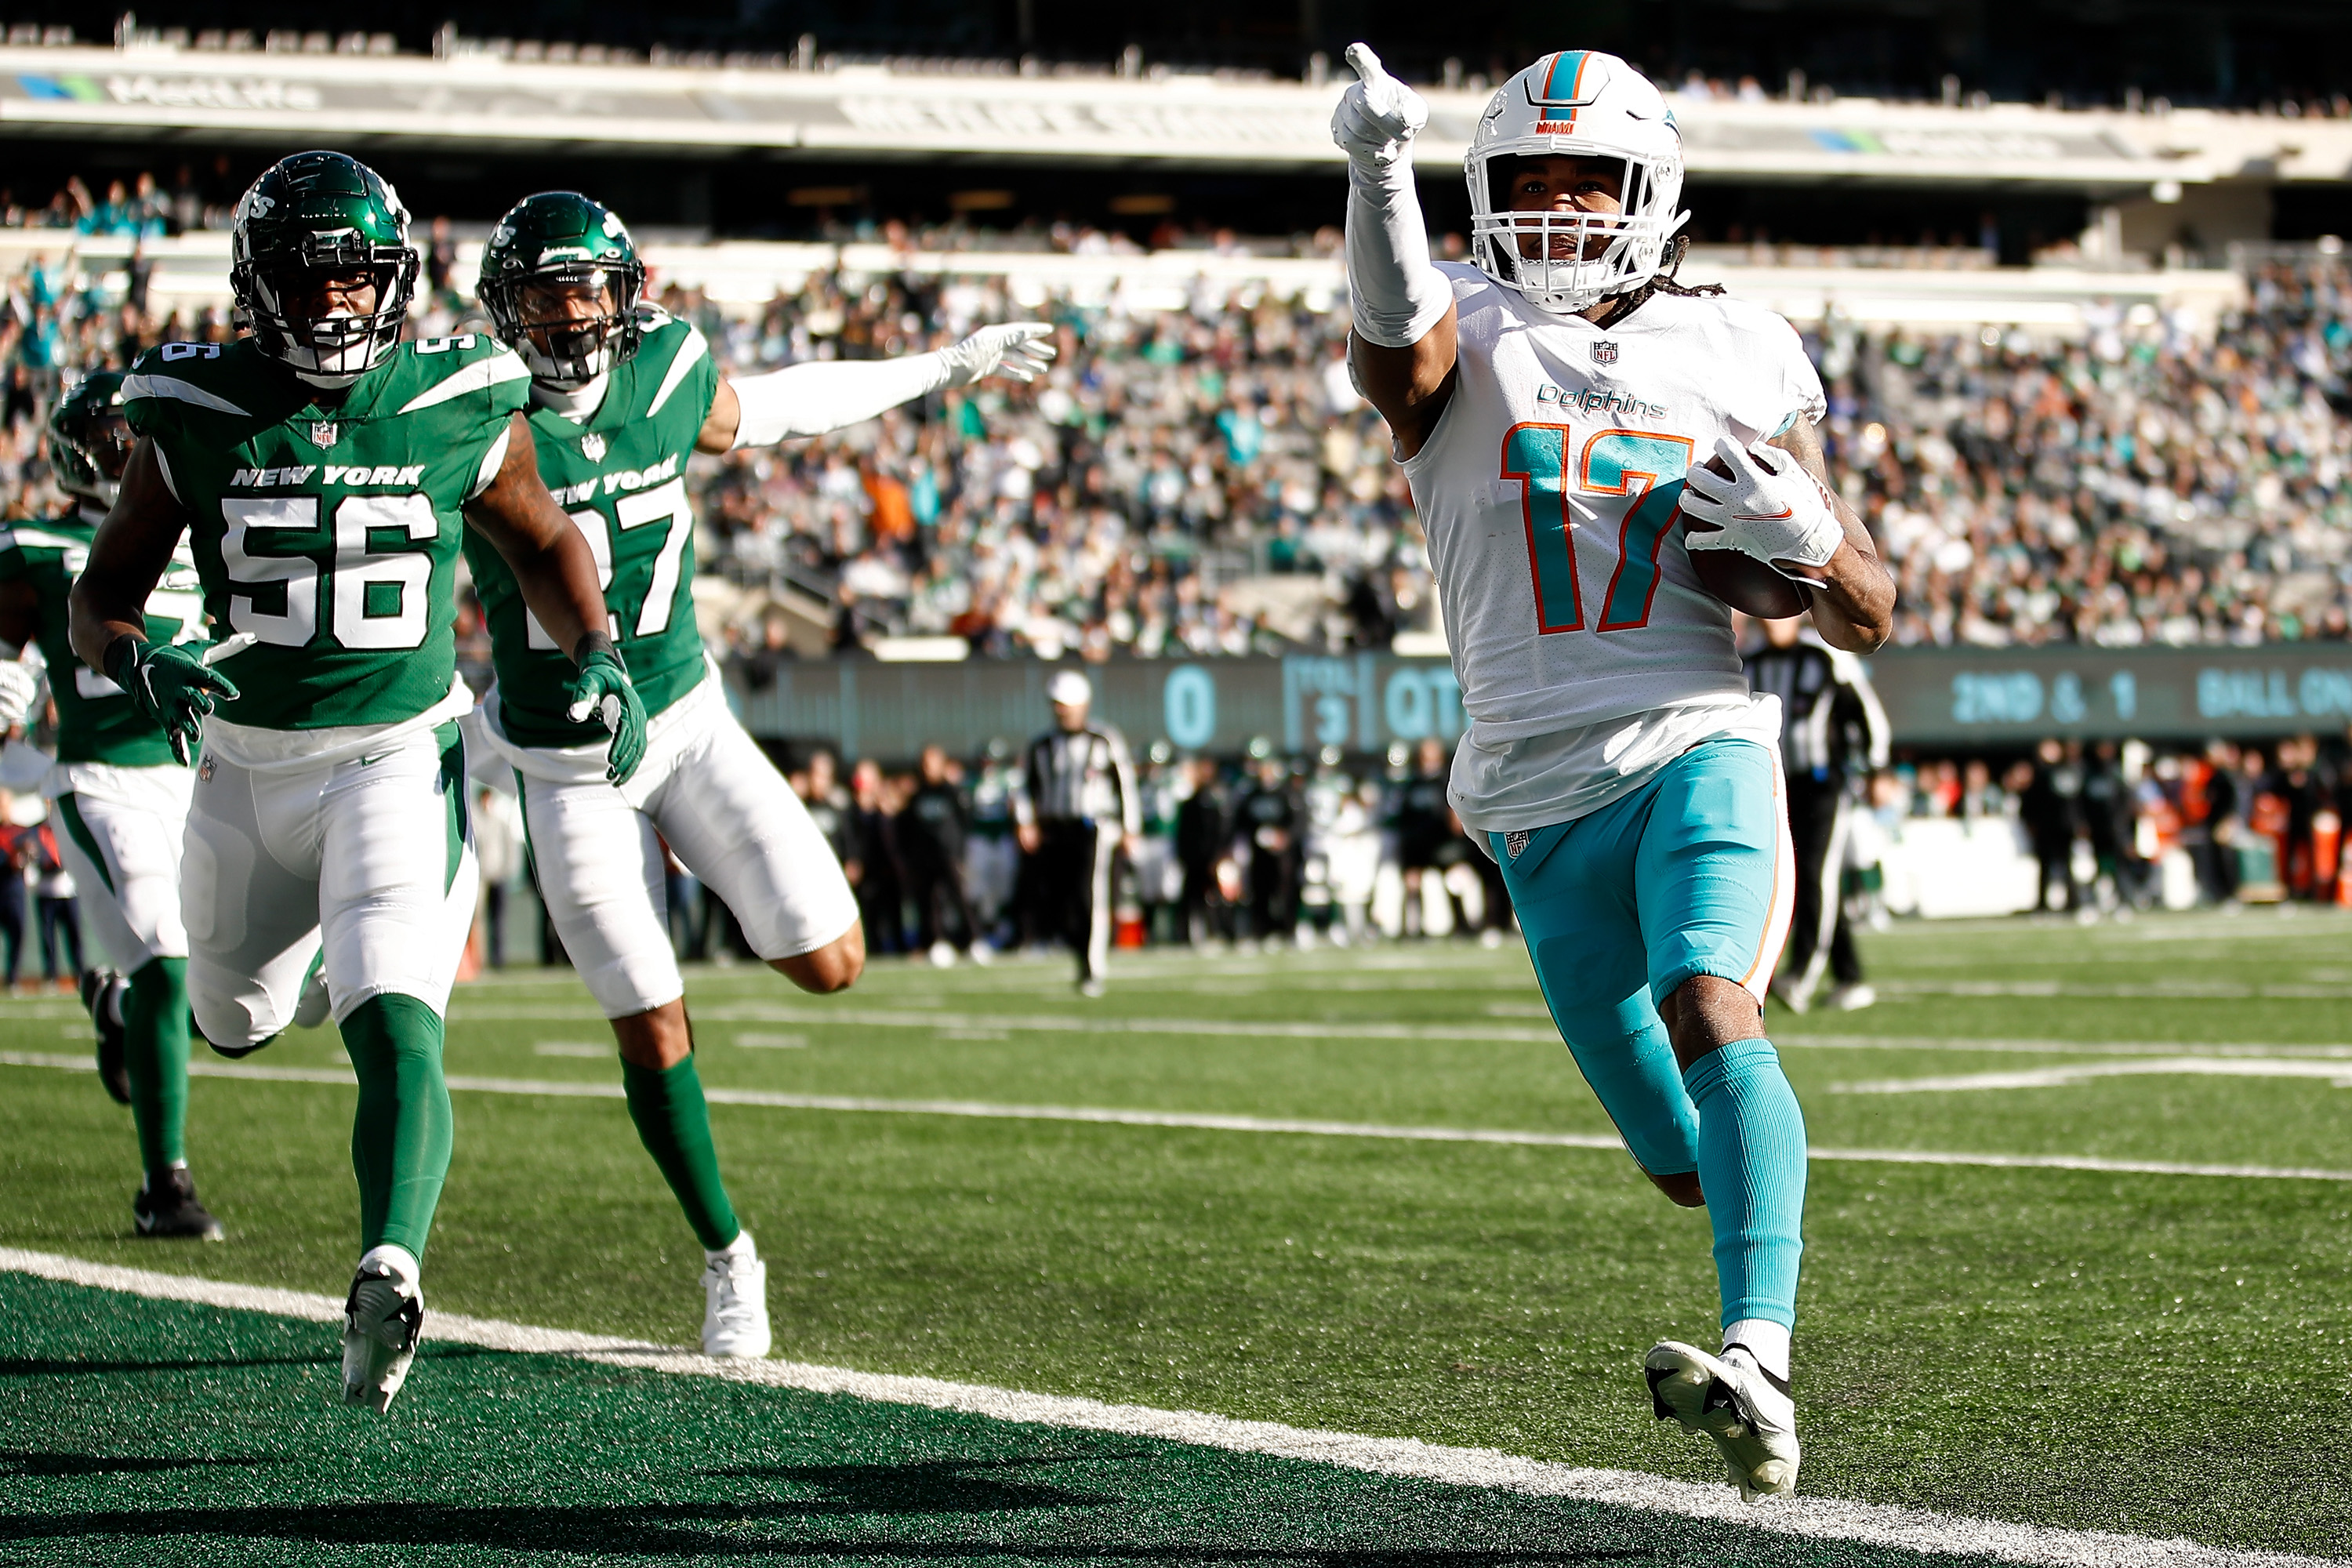 Jets could have competition for QB Mike White from the Dolphins